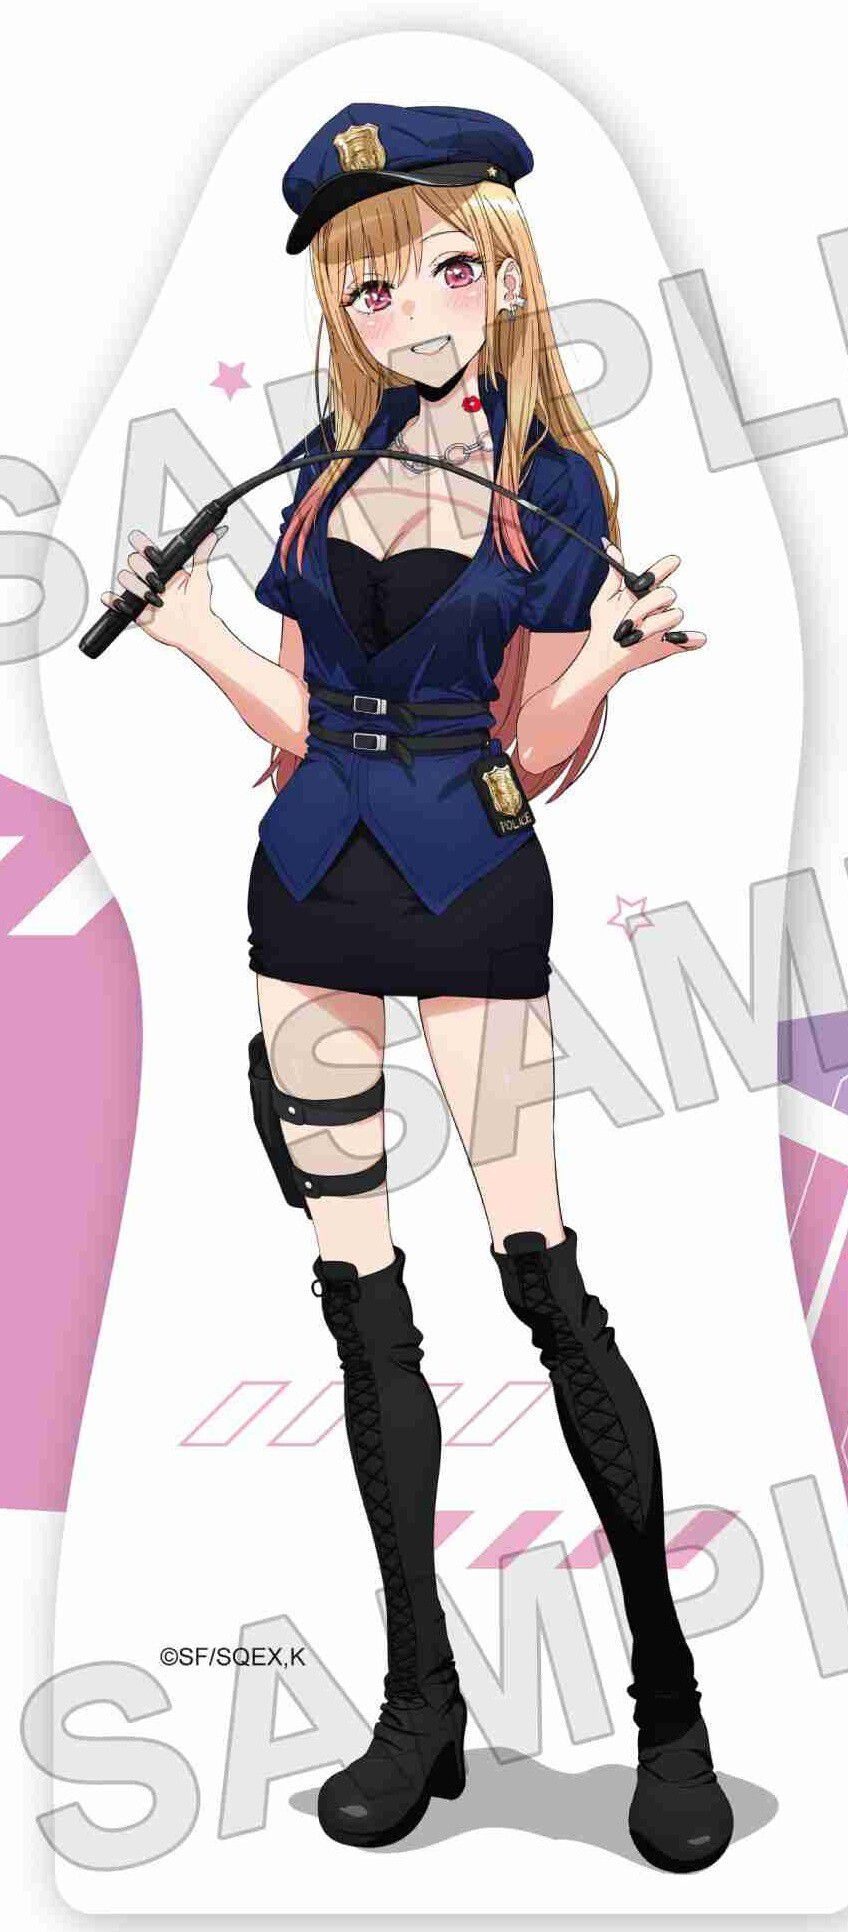 The dress-up doll falls in love Erotic illustration goods of lewd police officer cosplay of erotic 13